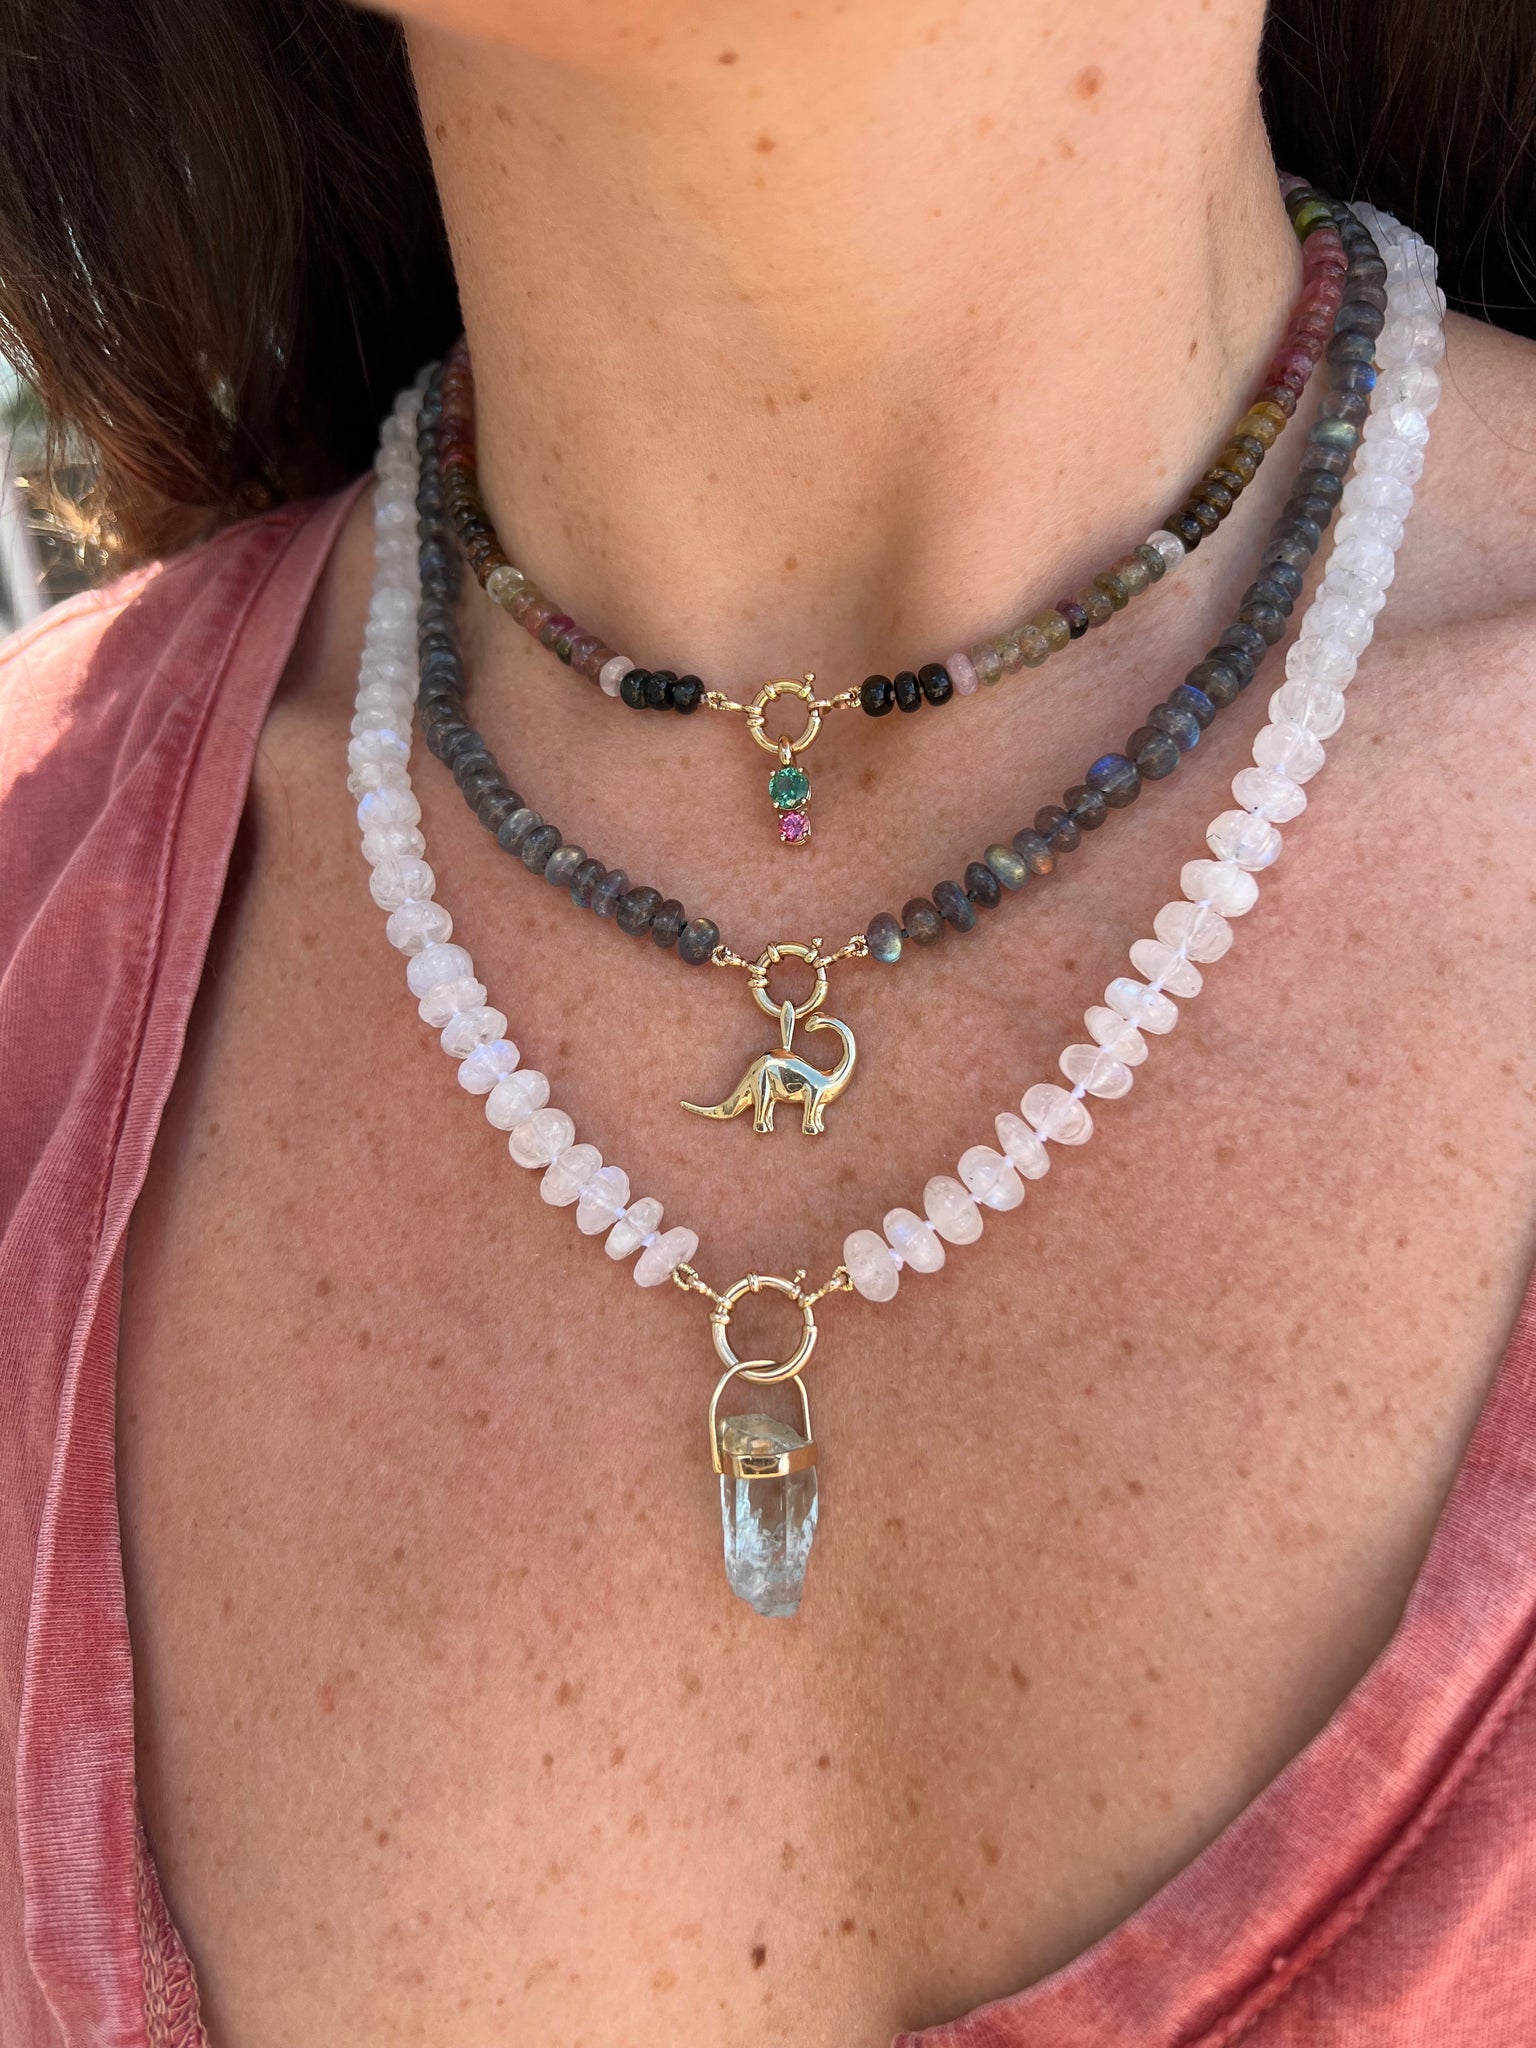 Model wearing the Spring mix 2 pendant by Lico Jewelry layered with other necklaces and pendants. She is wearing a light pink shirt and the pendant features genuine green and pink tourmaline stones in 14k yellow gold on a rolo chain